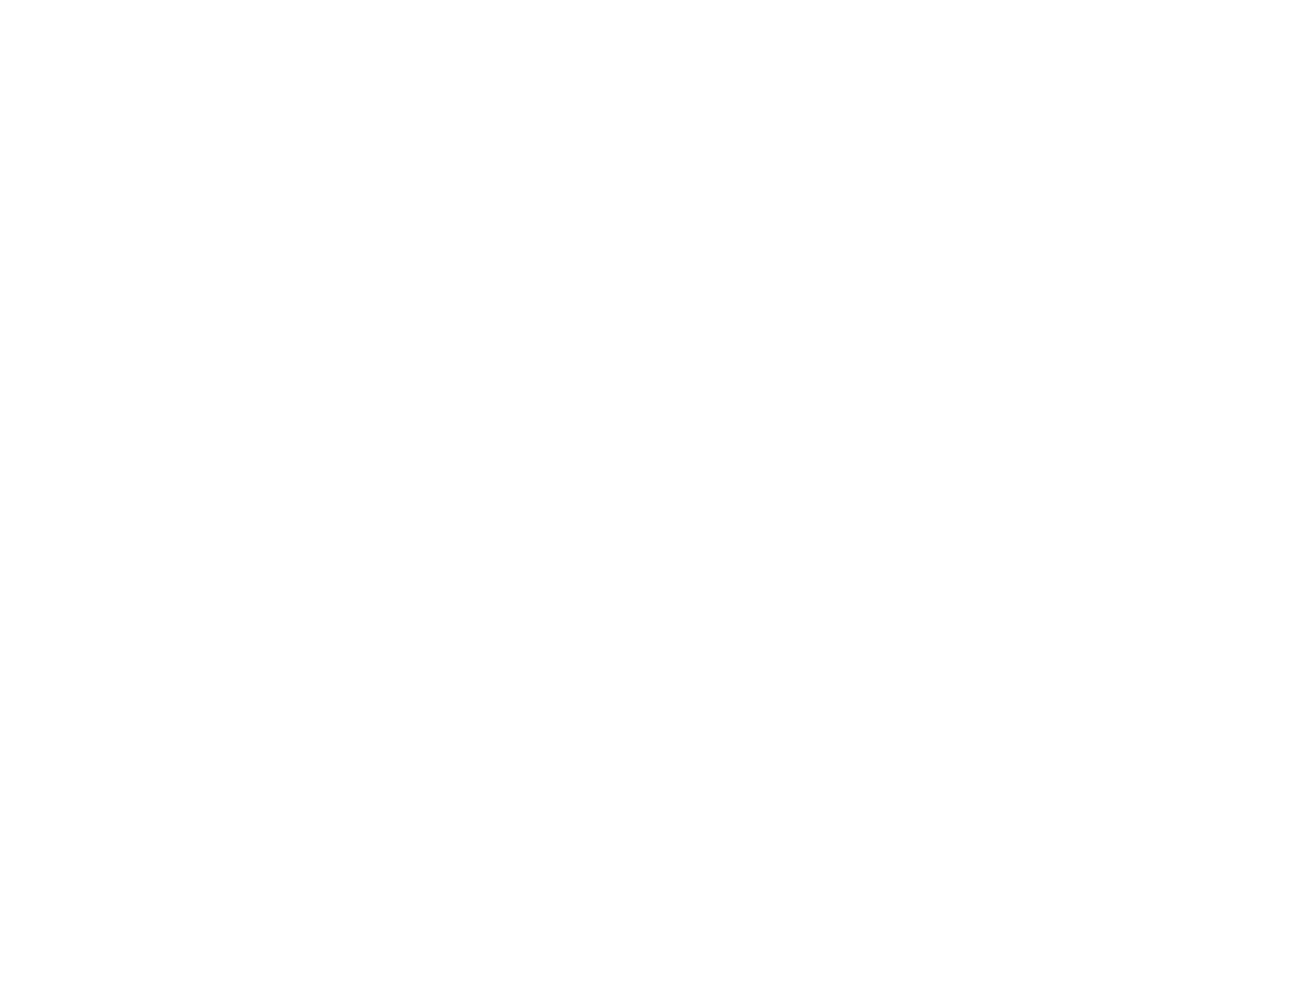 Wildcat Brothers Distilling at Gator Cove